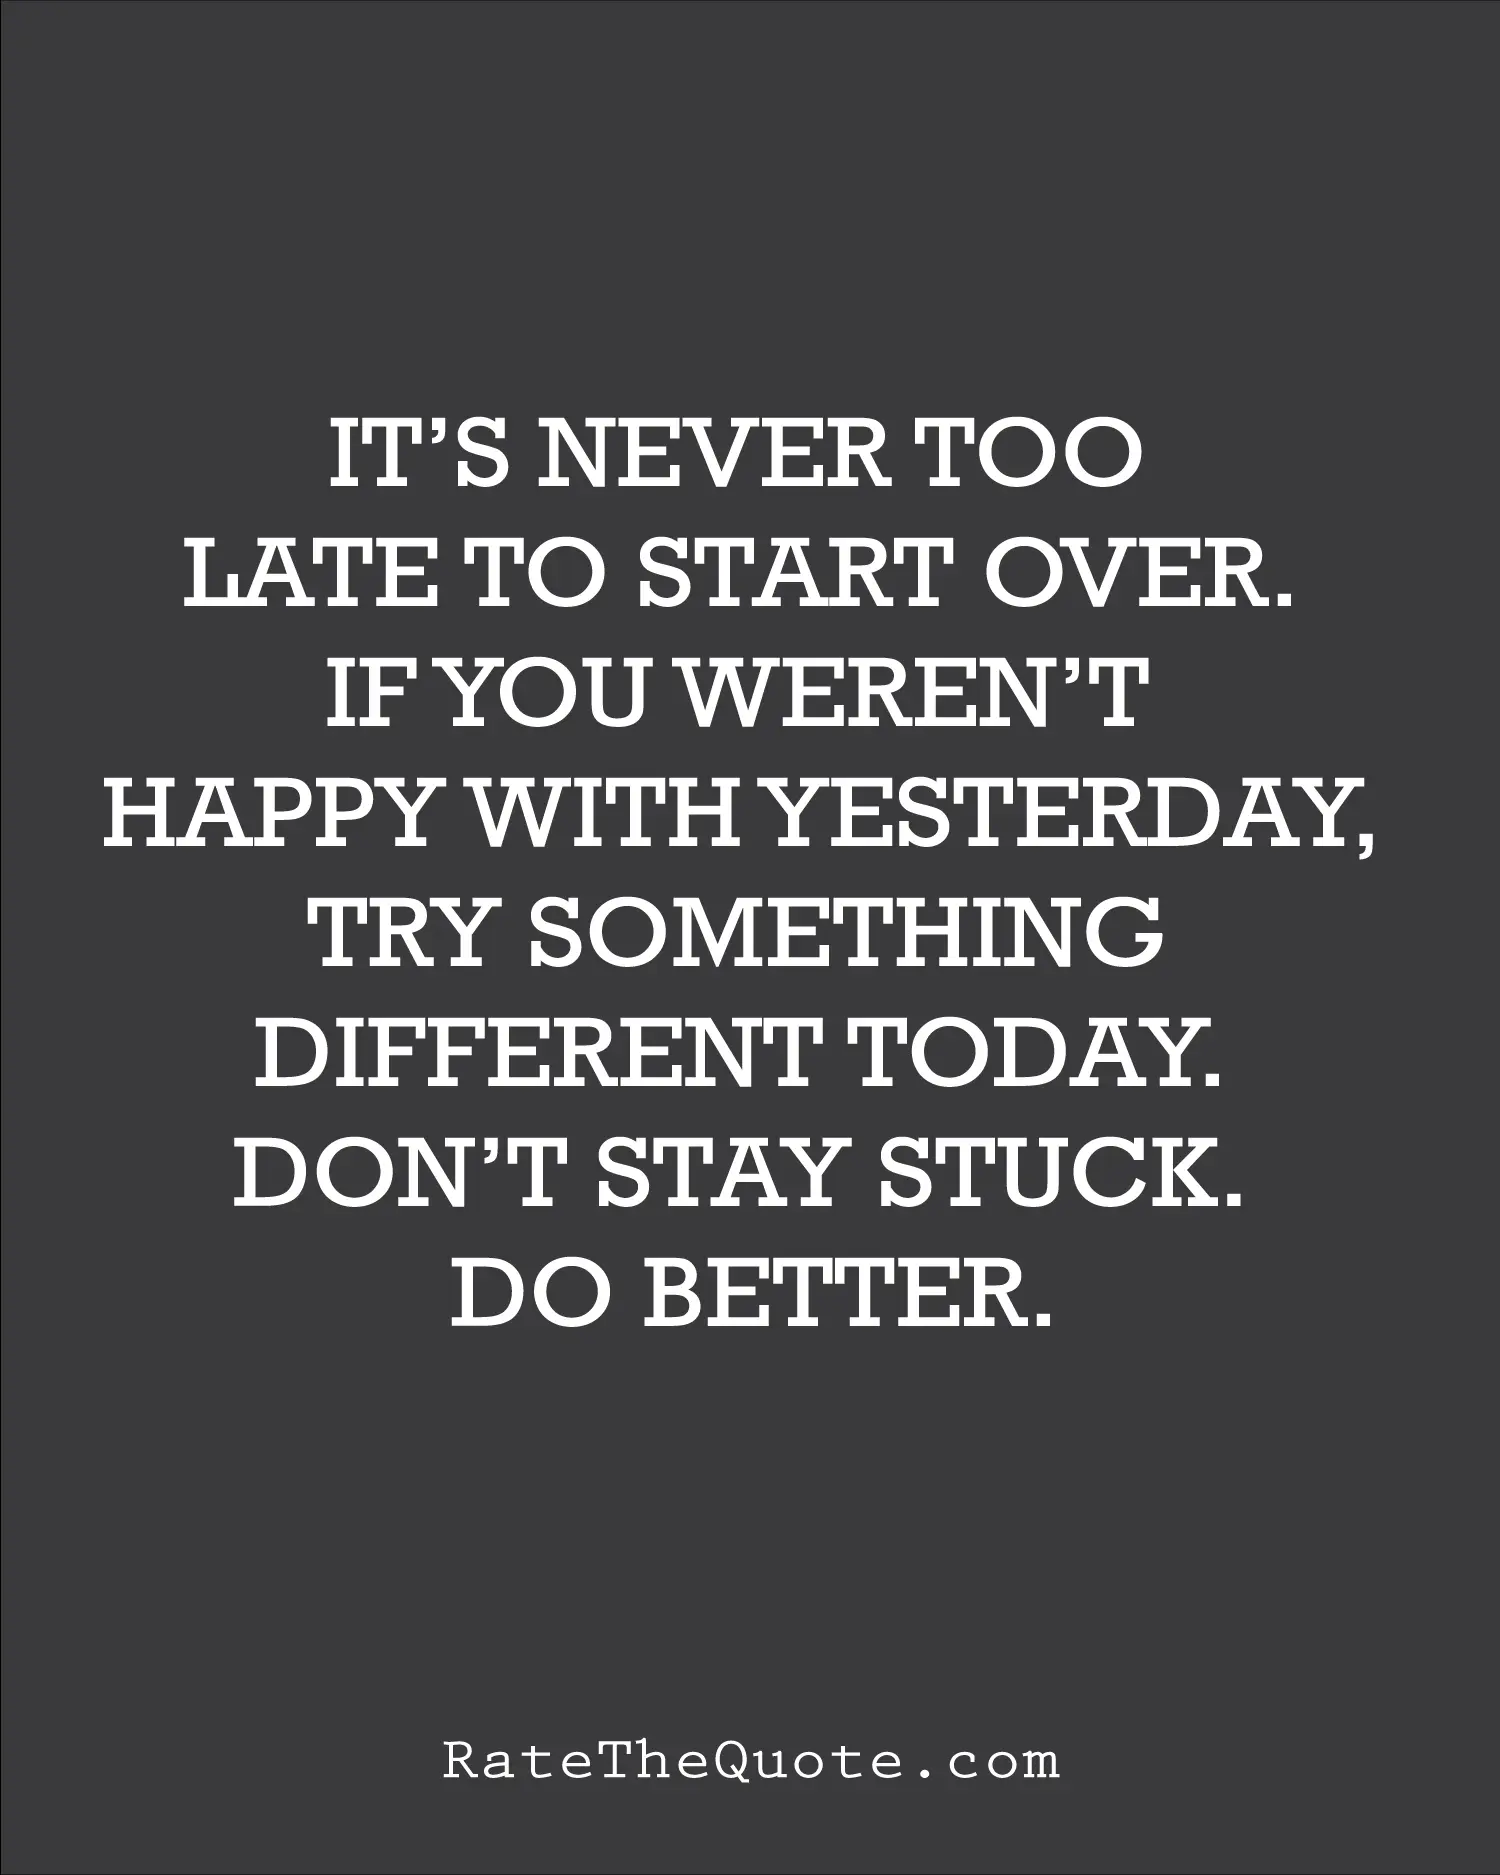 Quote It's never too late to start over. If you weren't happy with yesterday, try something different today. Don't stay stuck. Do better.